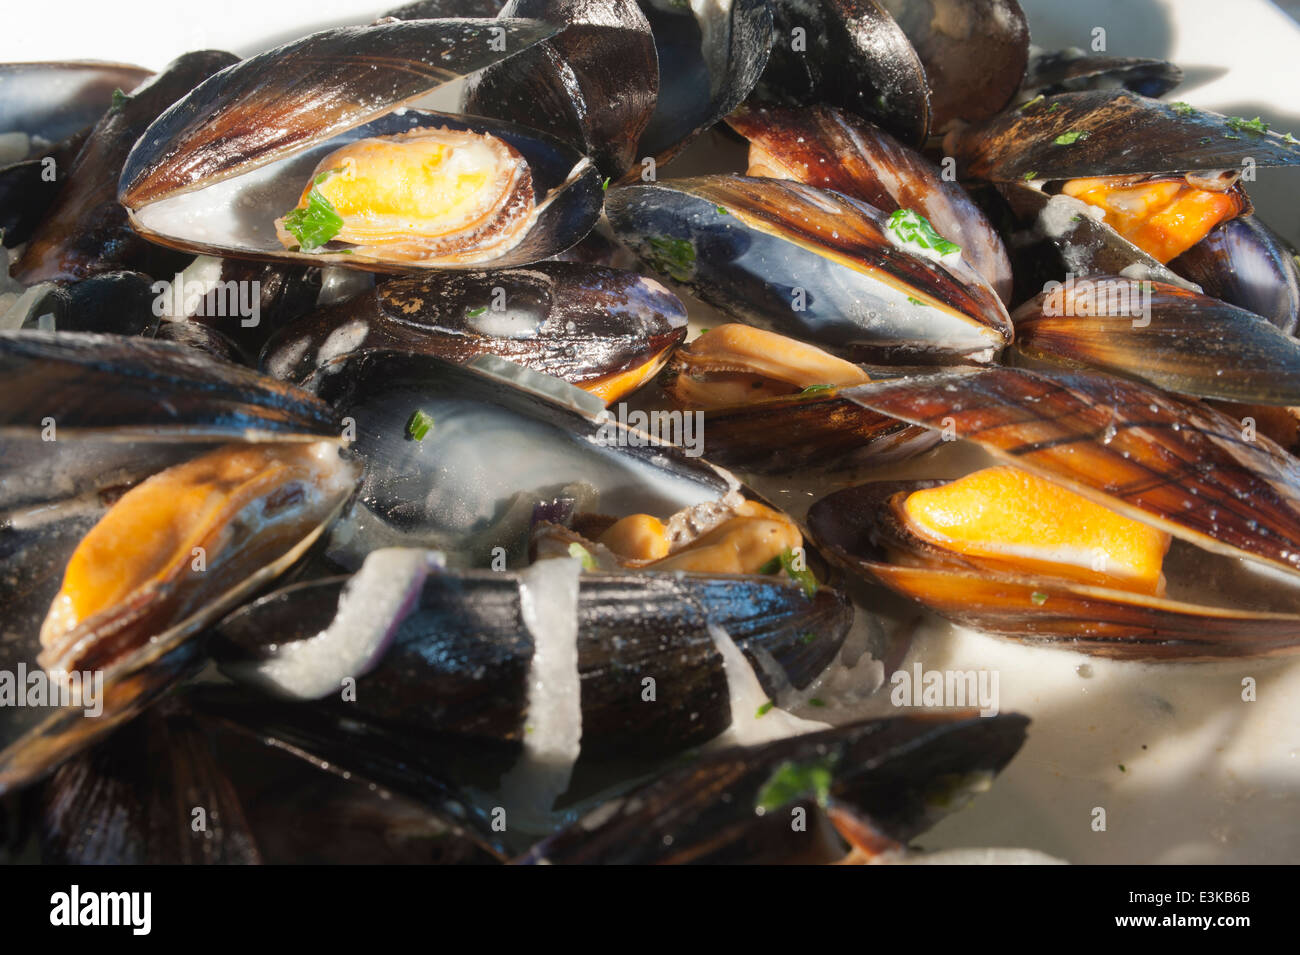 Moules or Mussels cooked in white wine with parsley. Stock Photo